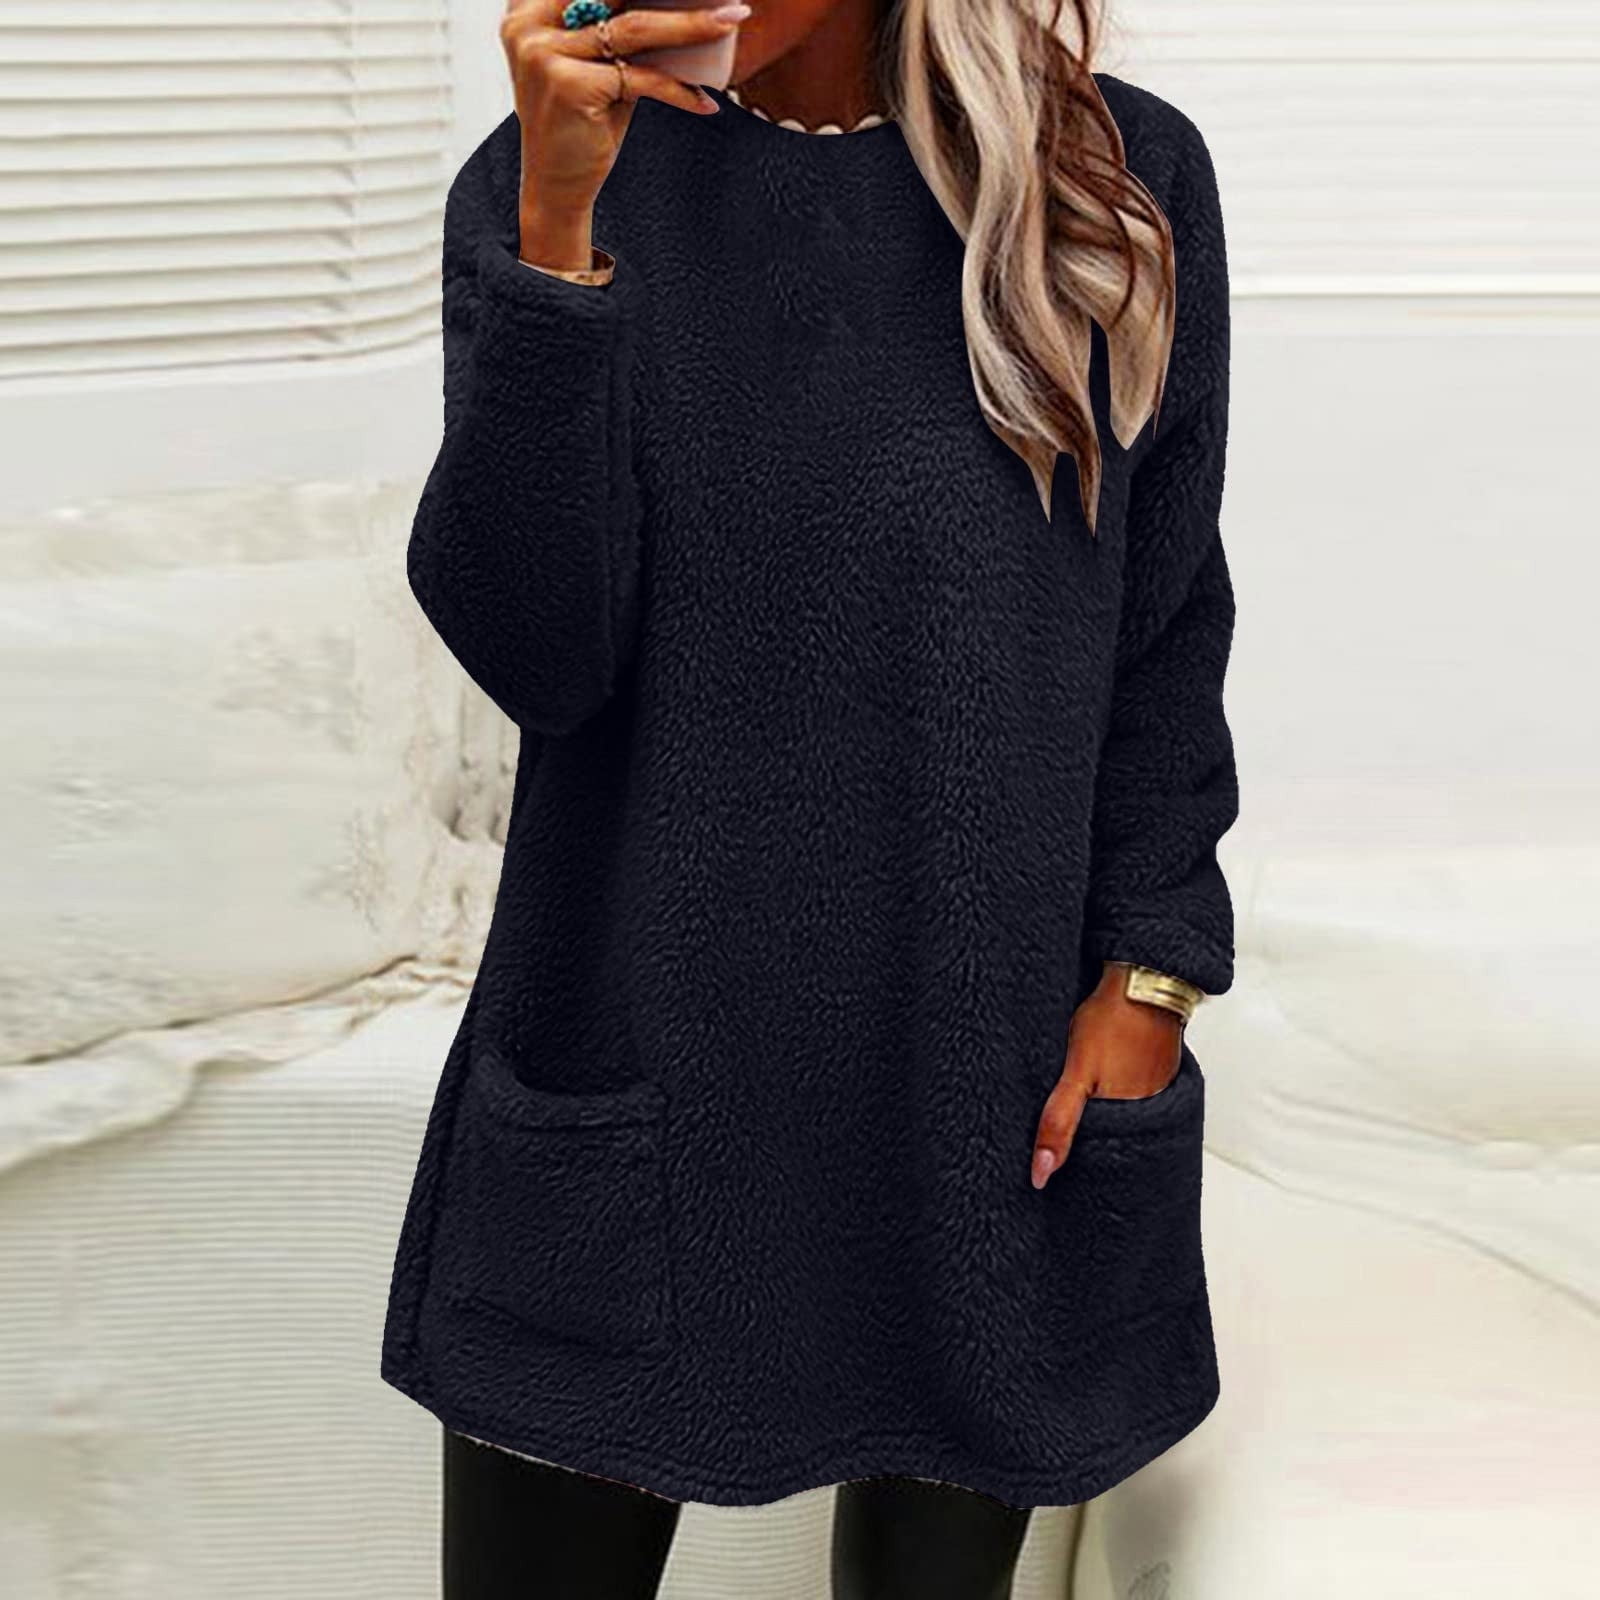 Polo Ralph Lauren Oversized Cable Knit Wool Cashmere Sweater, $125 | Macy's  | Lookastic